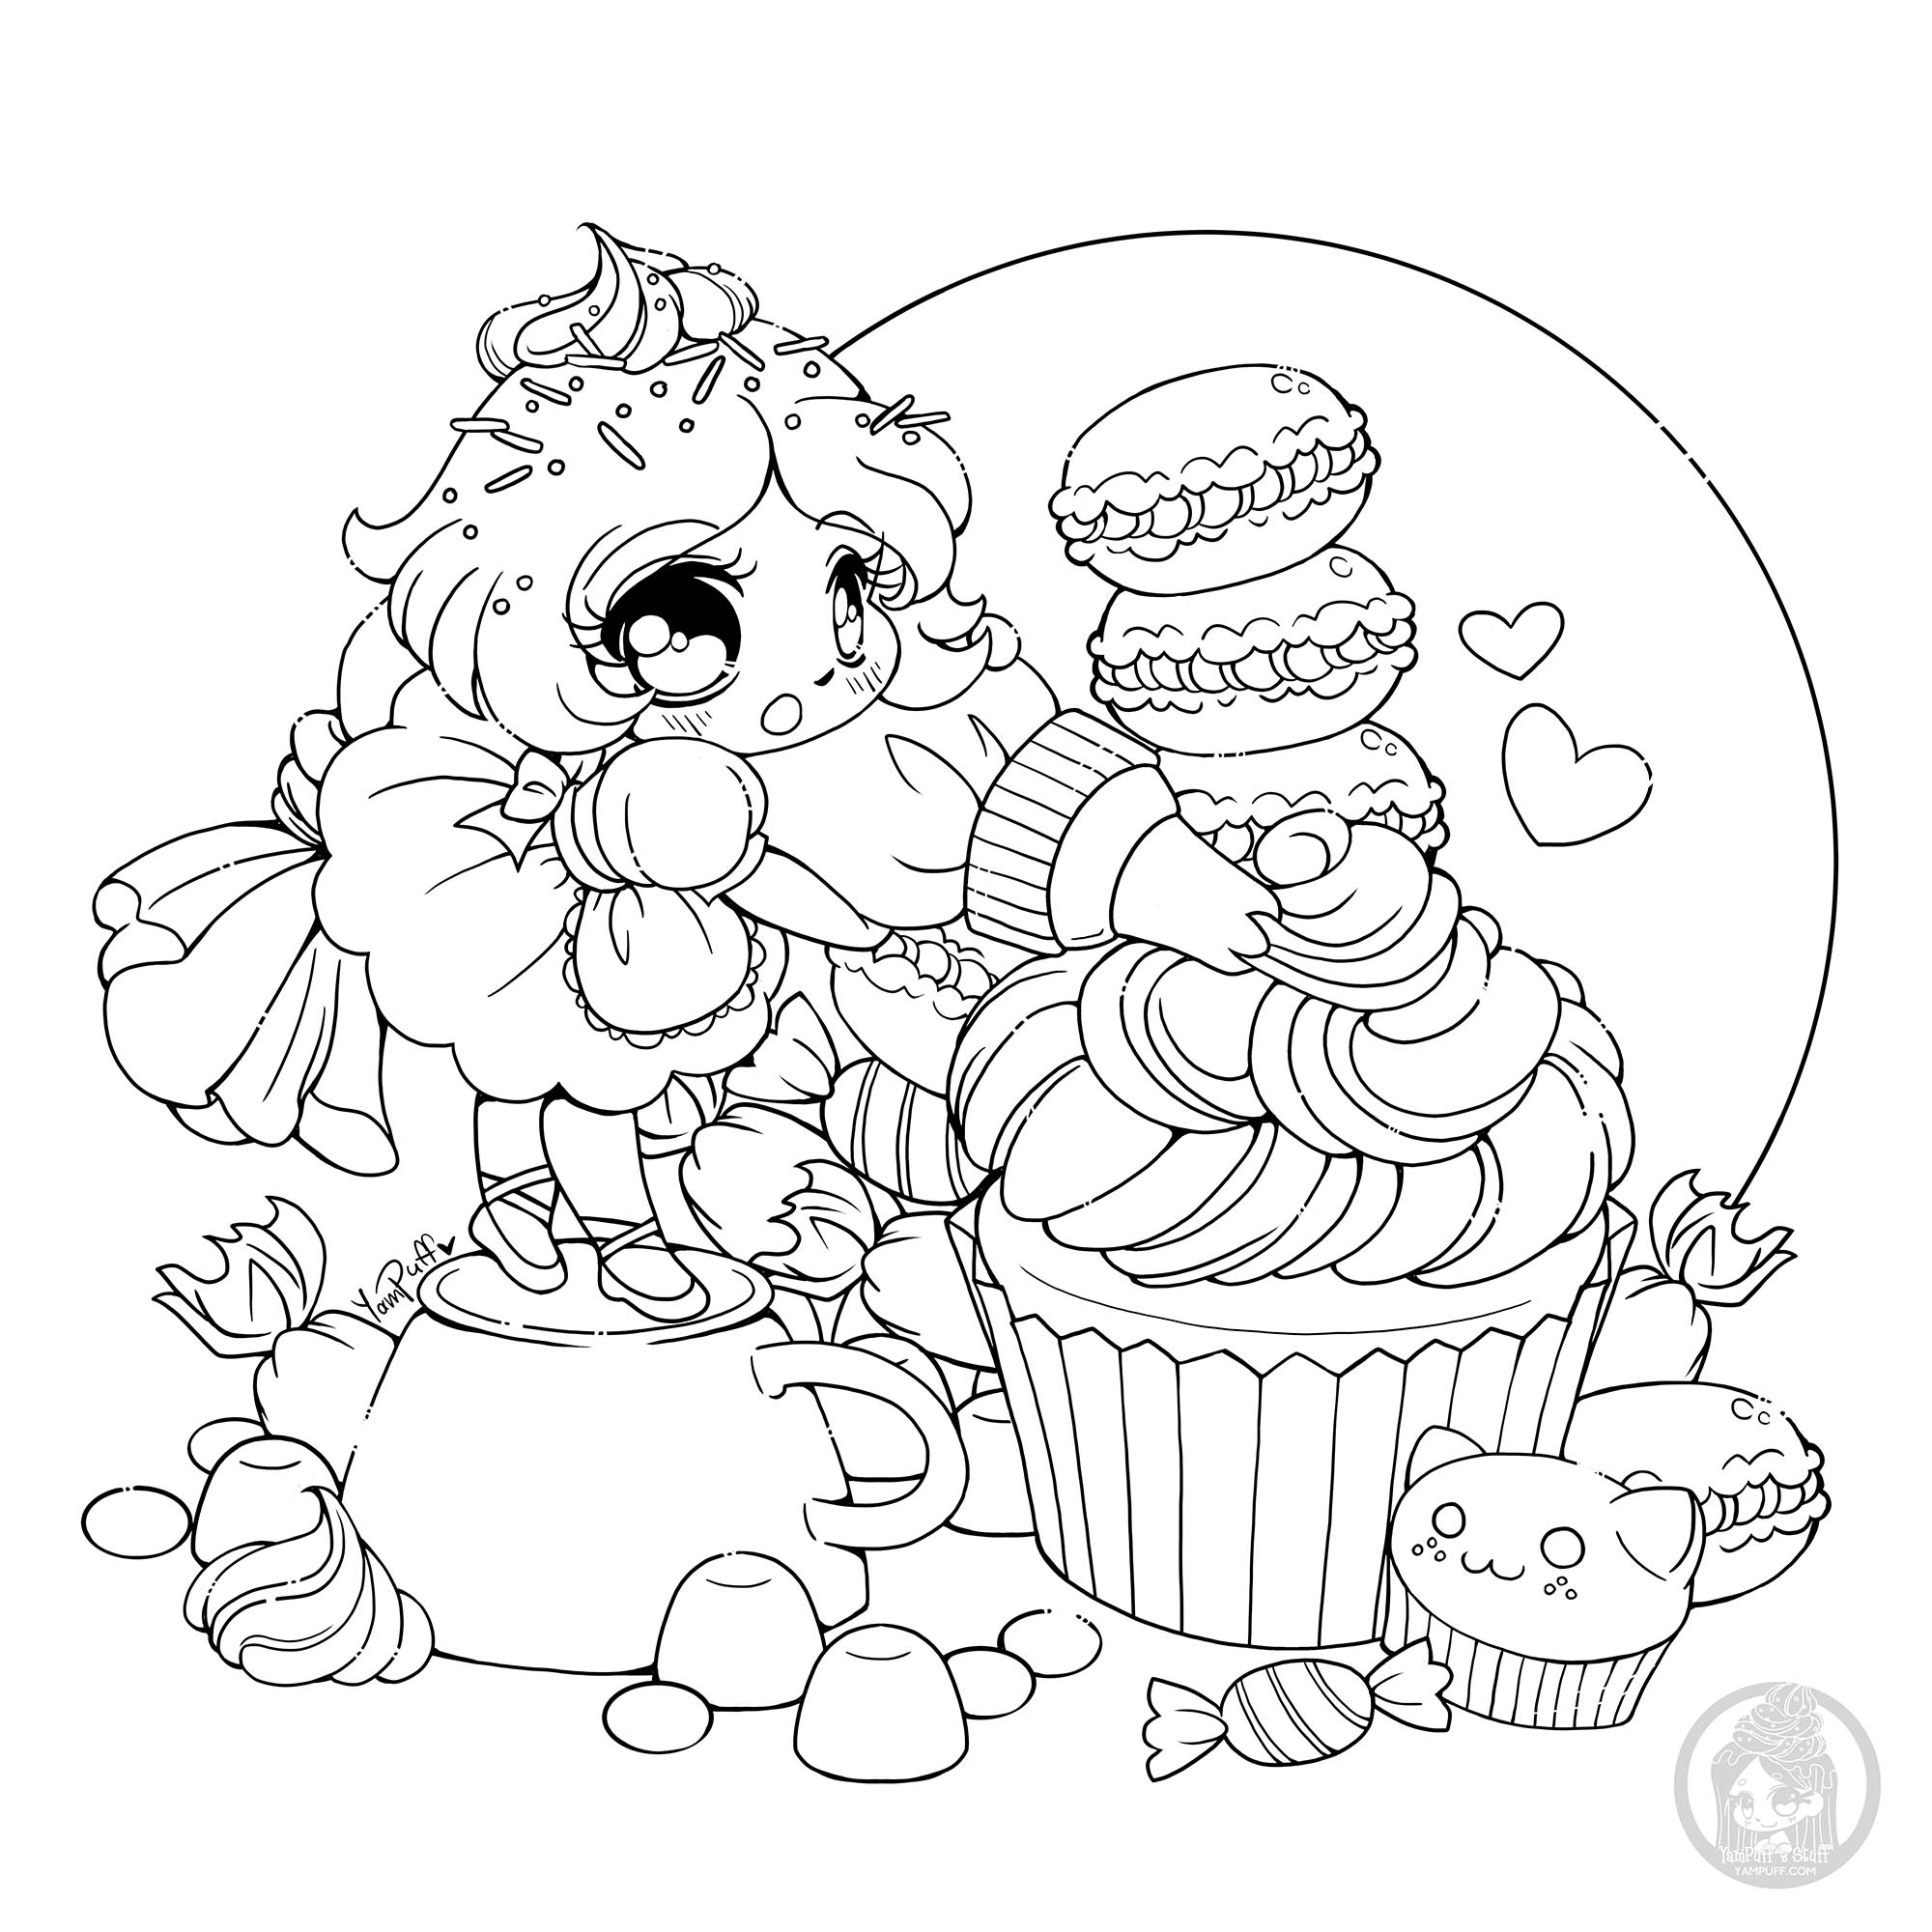 Fairy Queen Coloring Pages Frosting Fairy Cupcakes Adult Coloring Pages